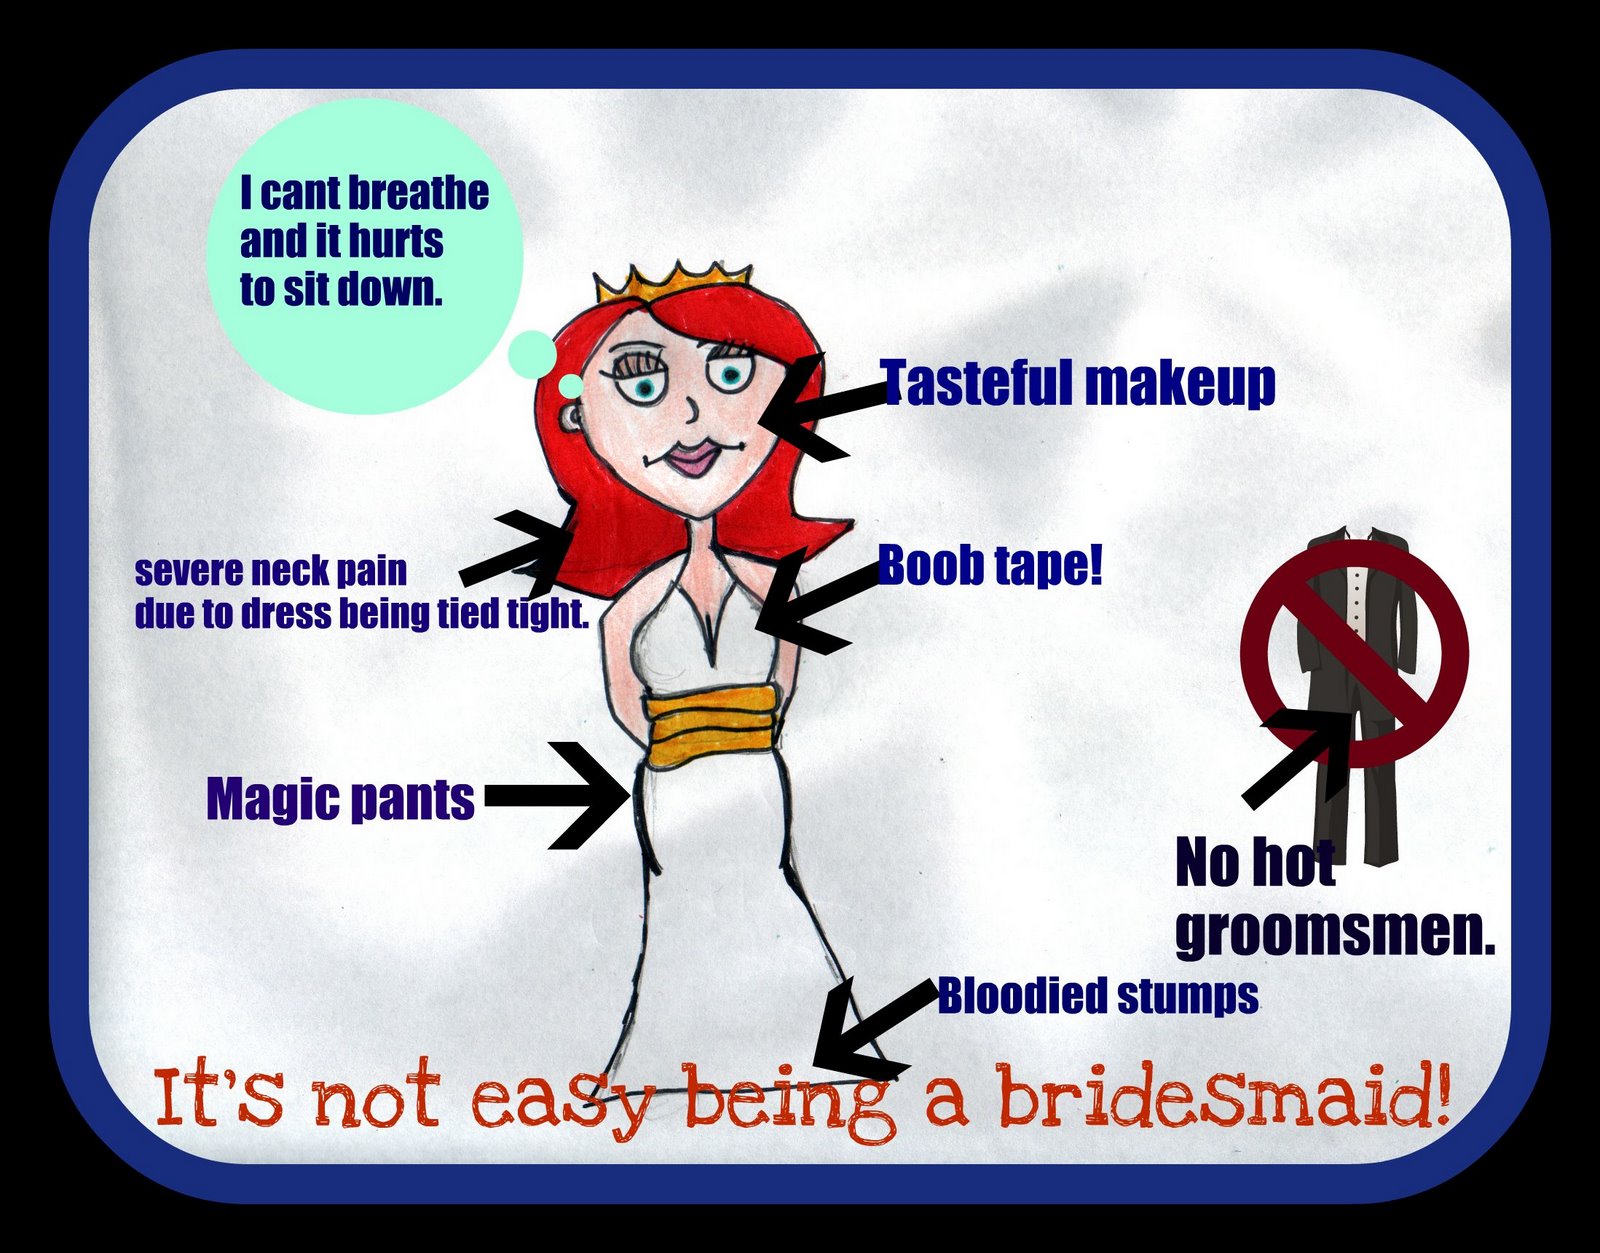 [It's+not+easy+being+a+bridesmaid!.jpg]